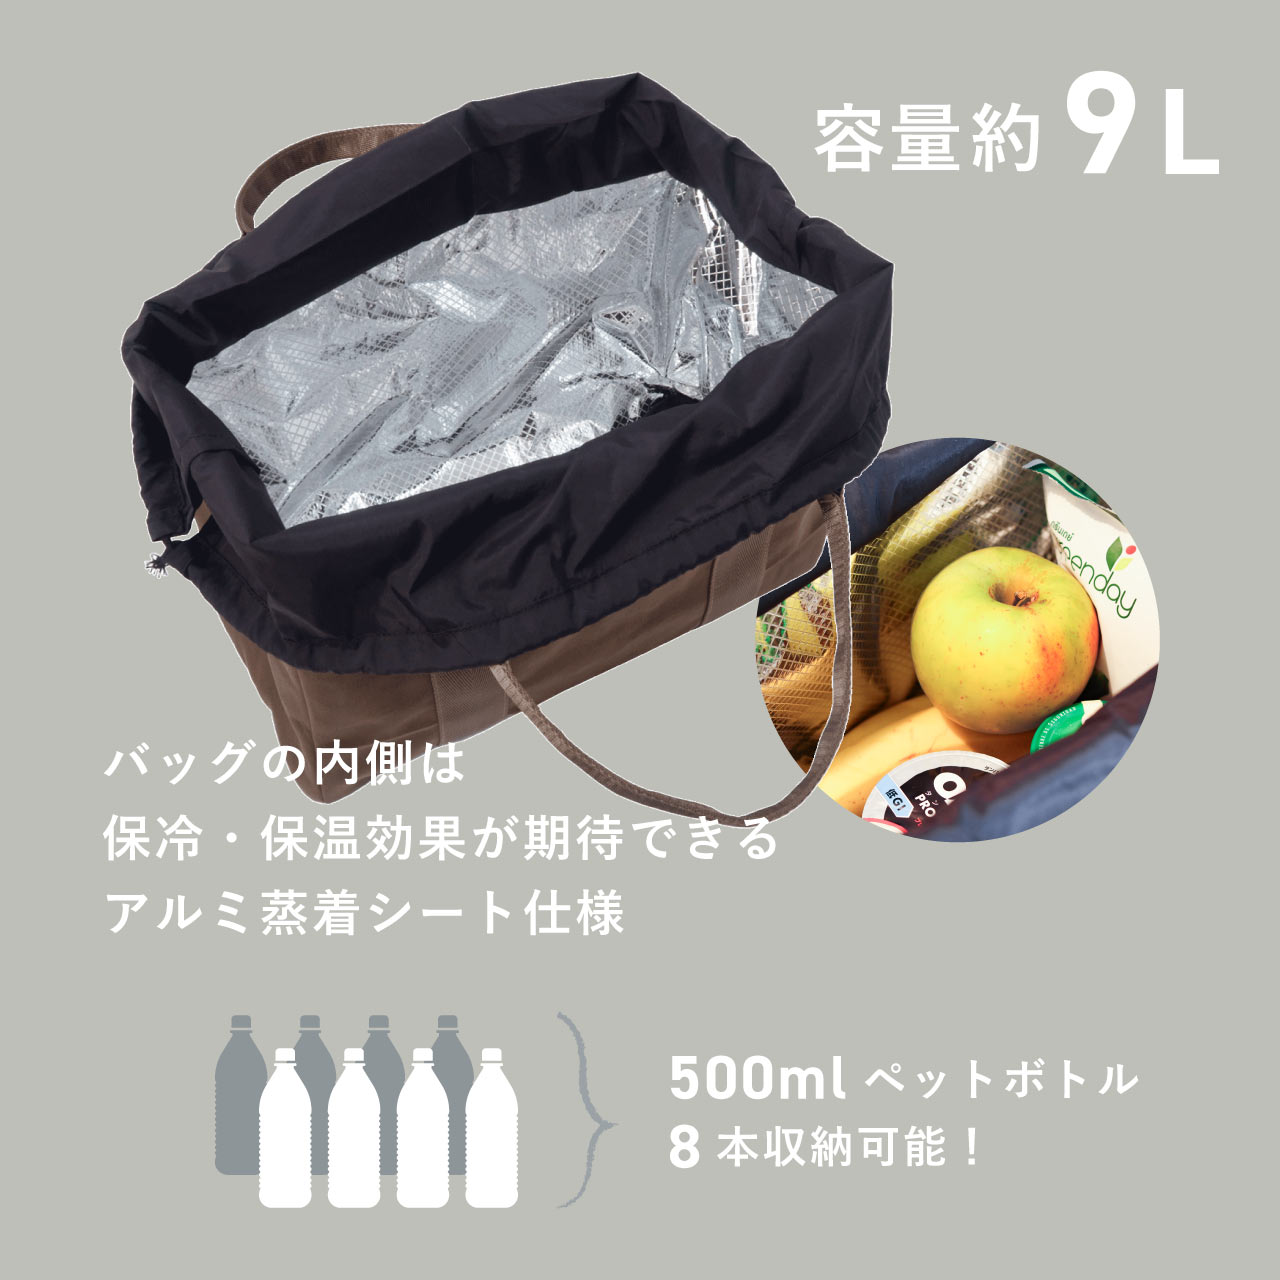 GOWITH COOLER TOTE / ゴーウィズ クーラートート - BLACK 【982440008 